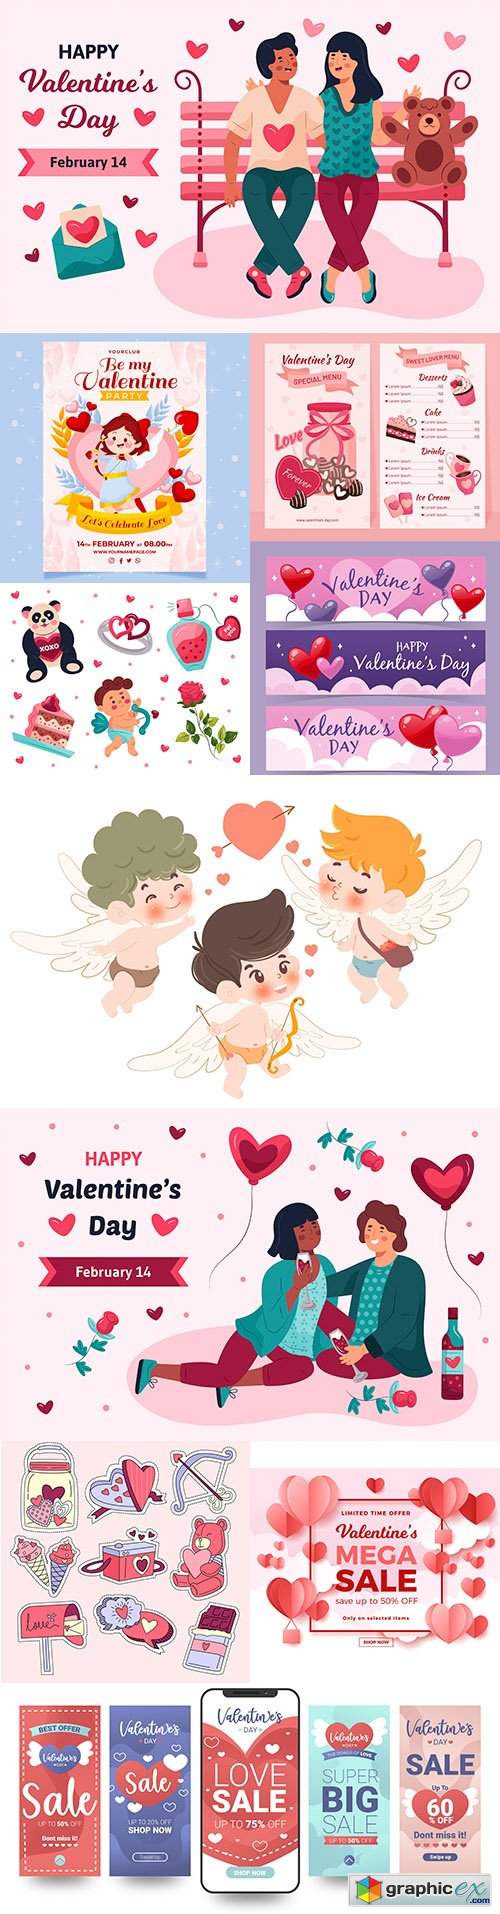  Valentine's Day sale and collection element design 